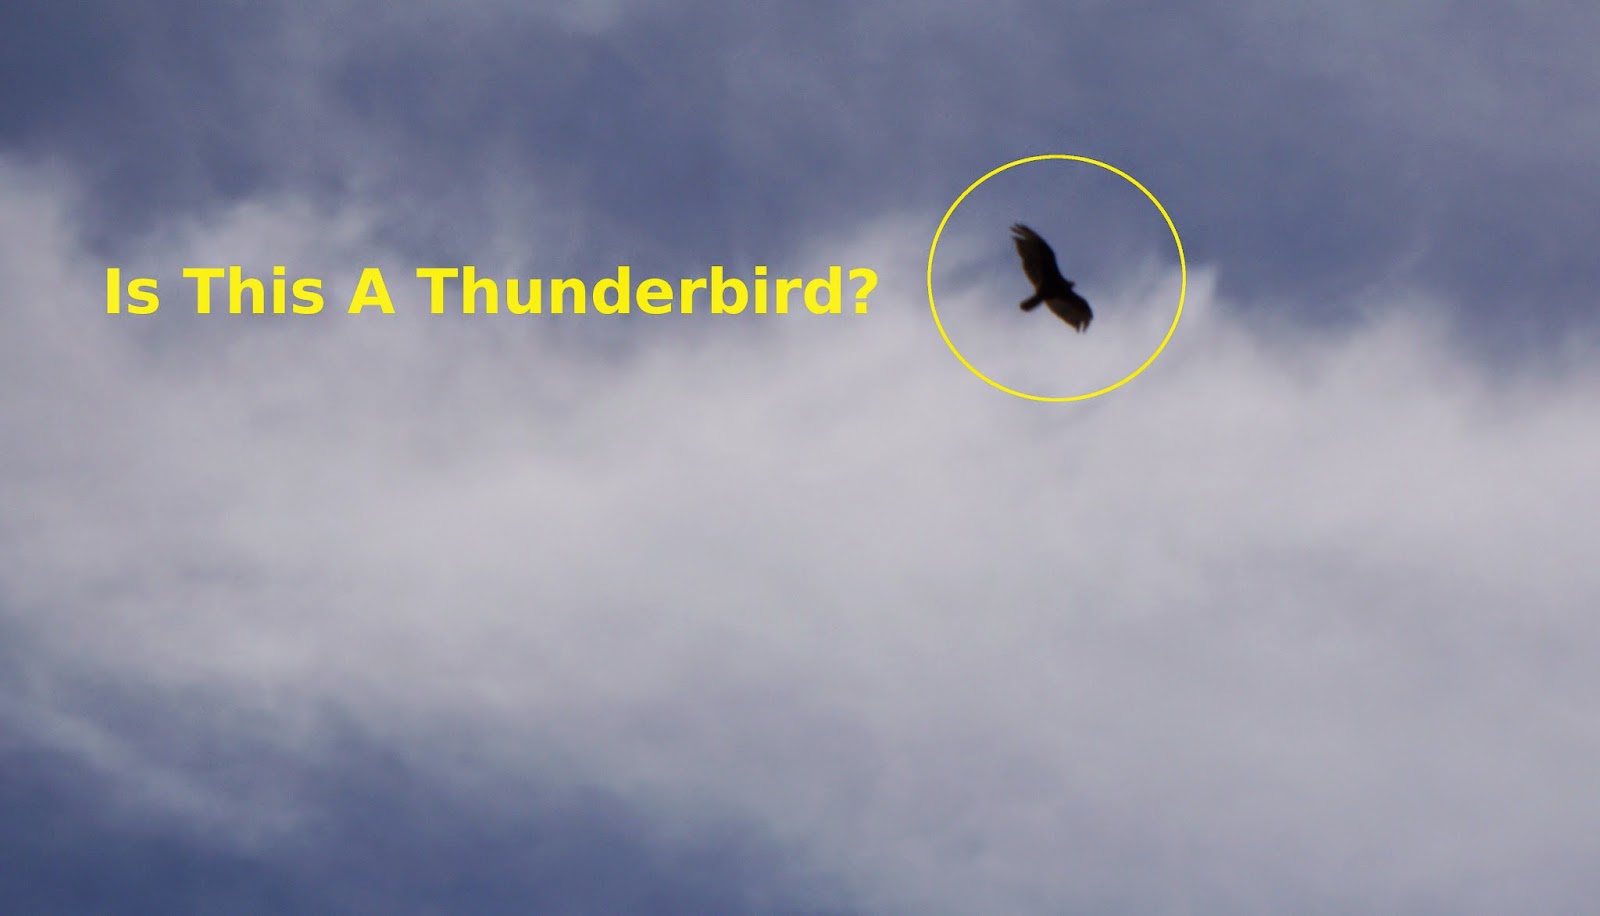 could it be a real Thunderbird